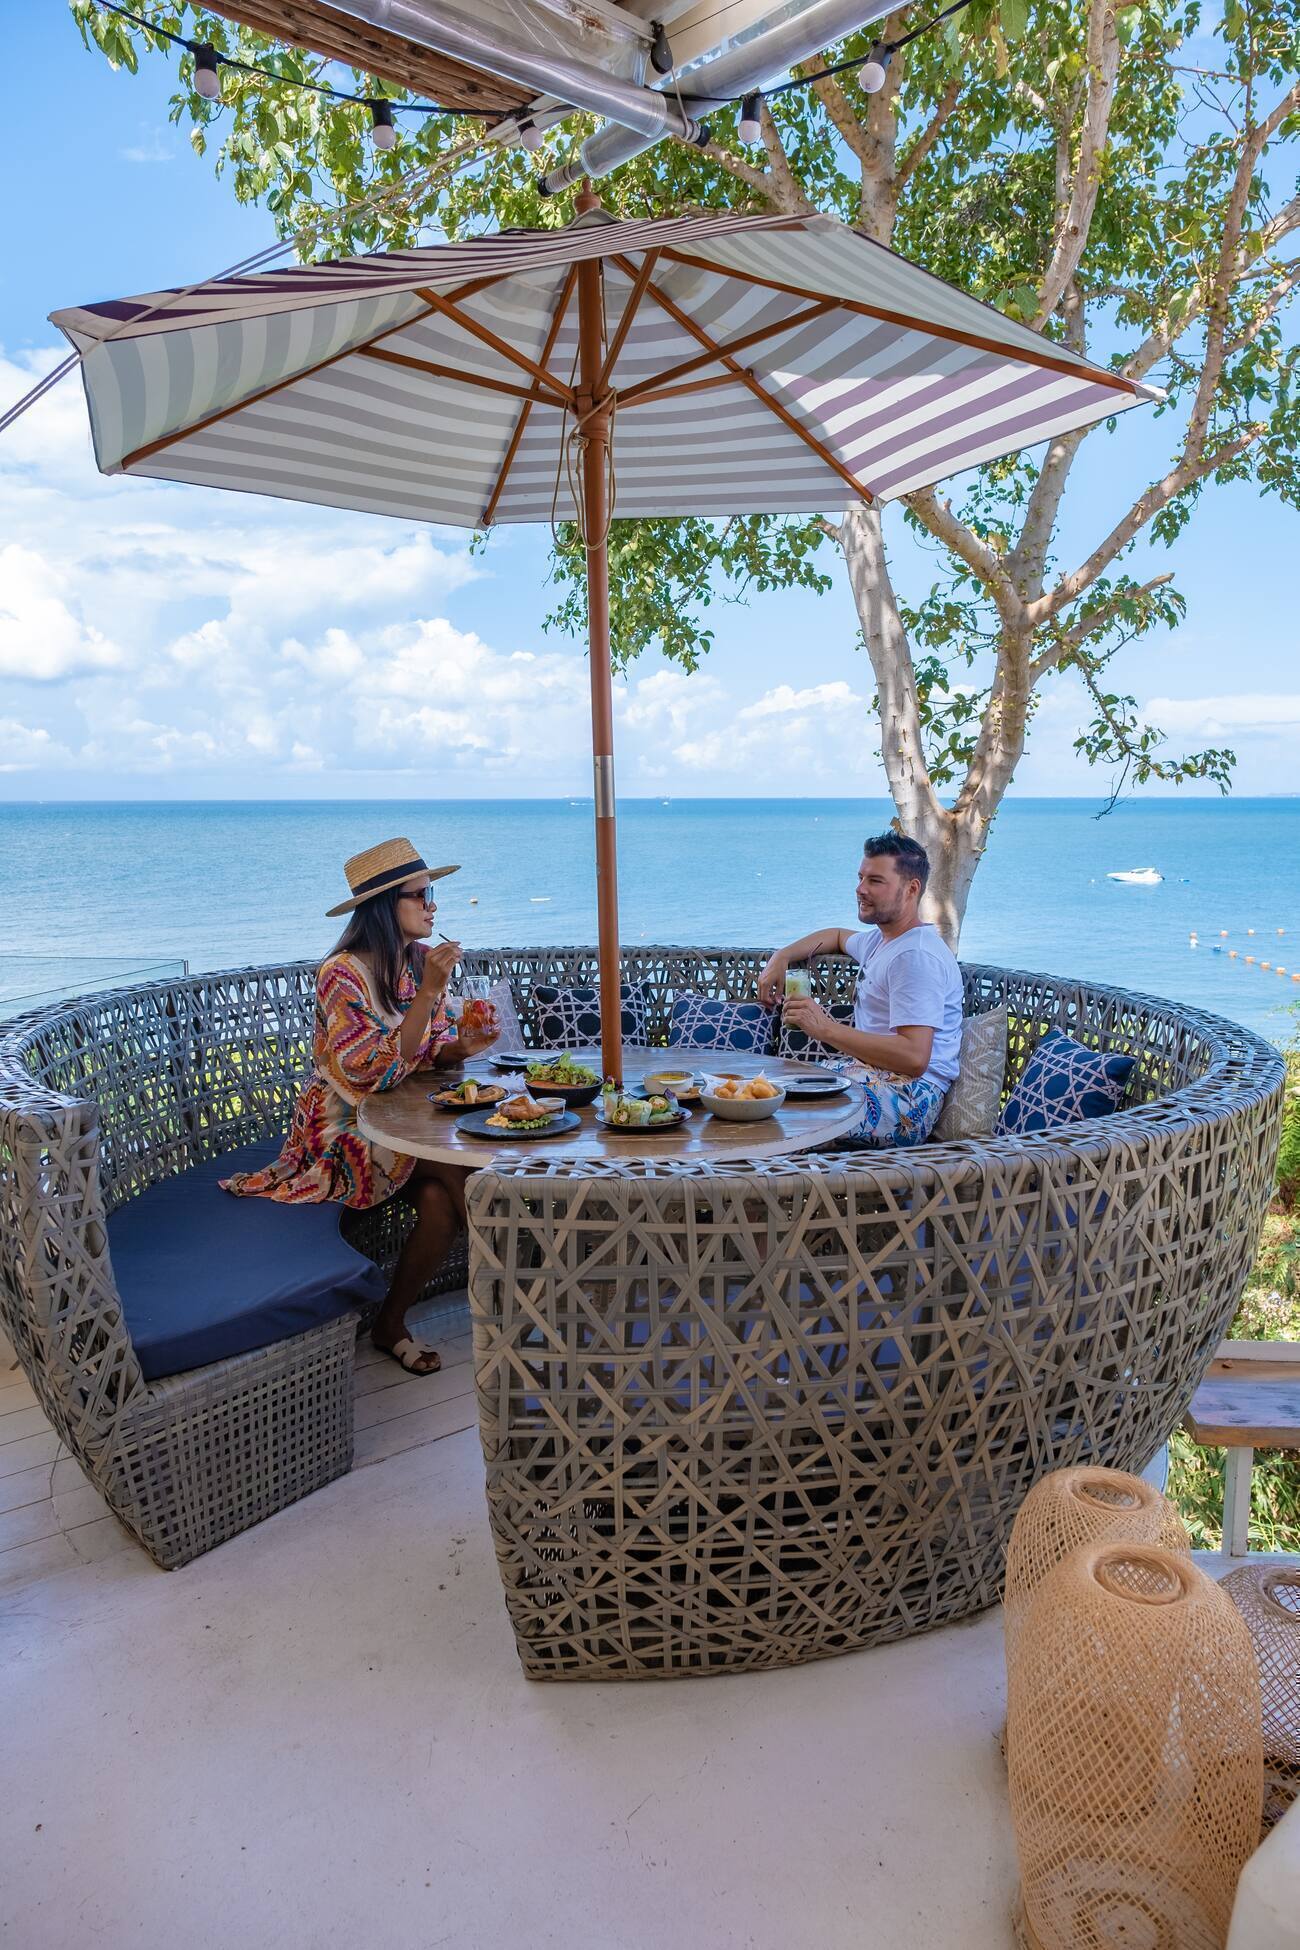 Two people eating at a table overlooking the ocean